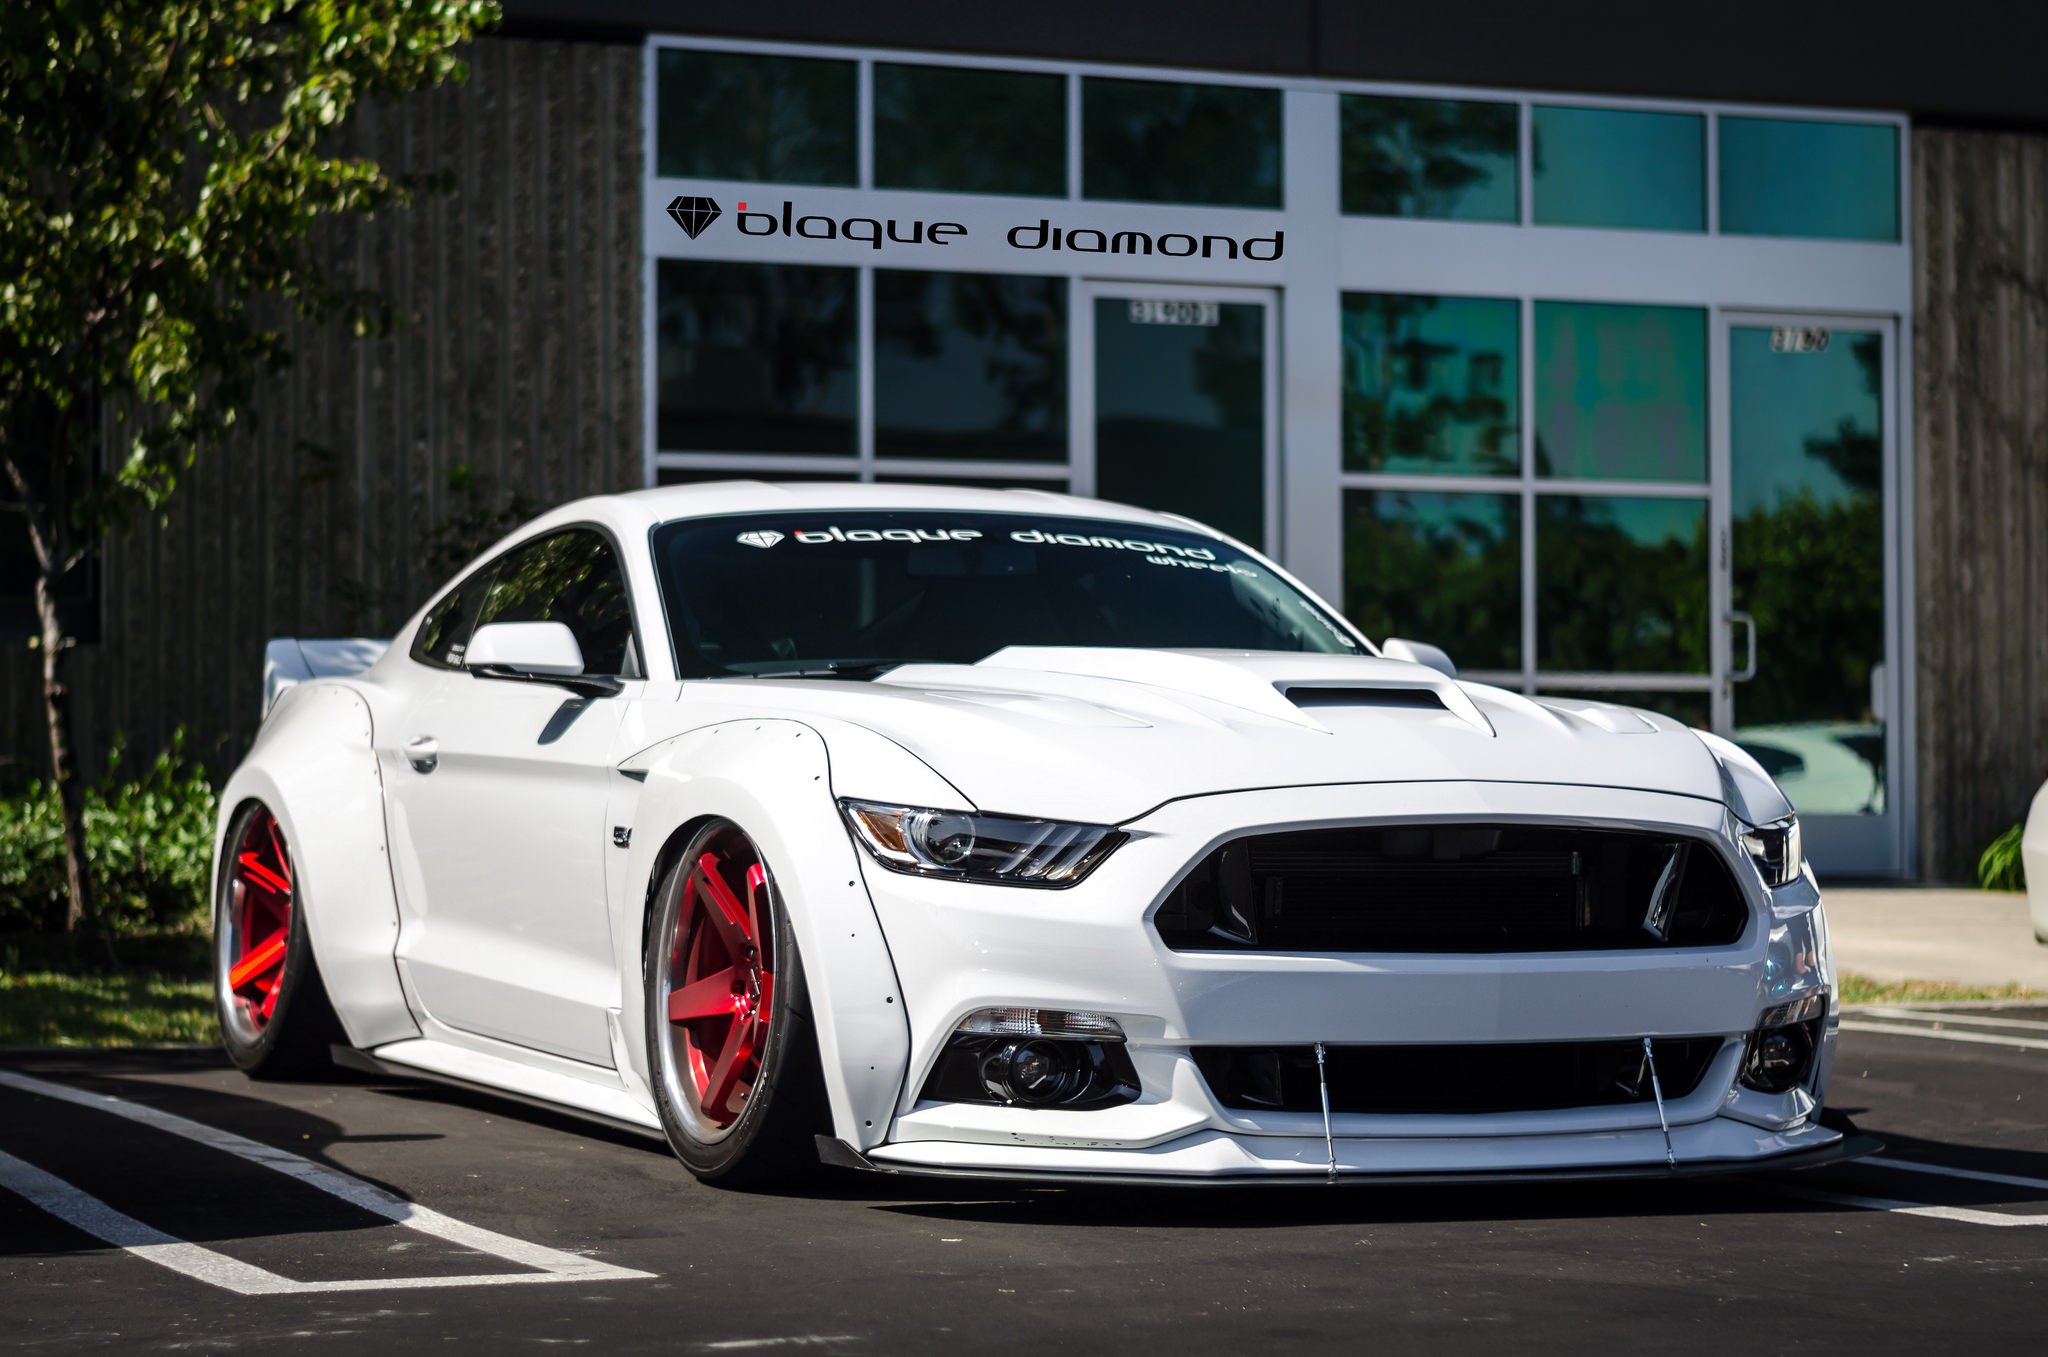 Tuning фото. Форд Мустанг GTR. Liberty walk Ford Mustang gt. Ford Mustang gt 2015 Tuning. Ford Mustang s550.